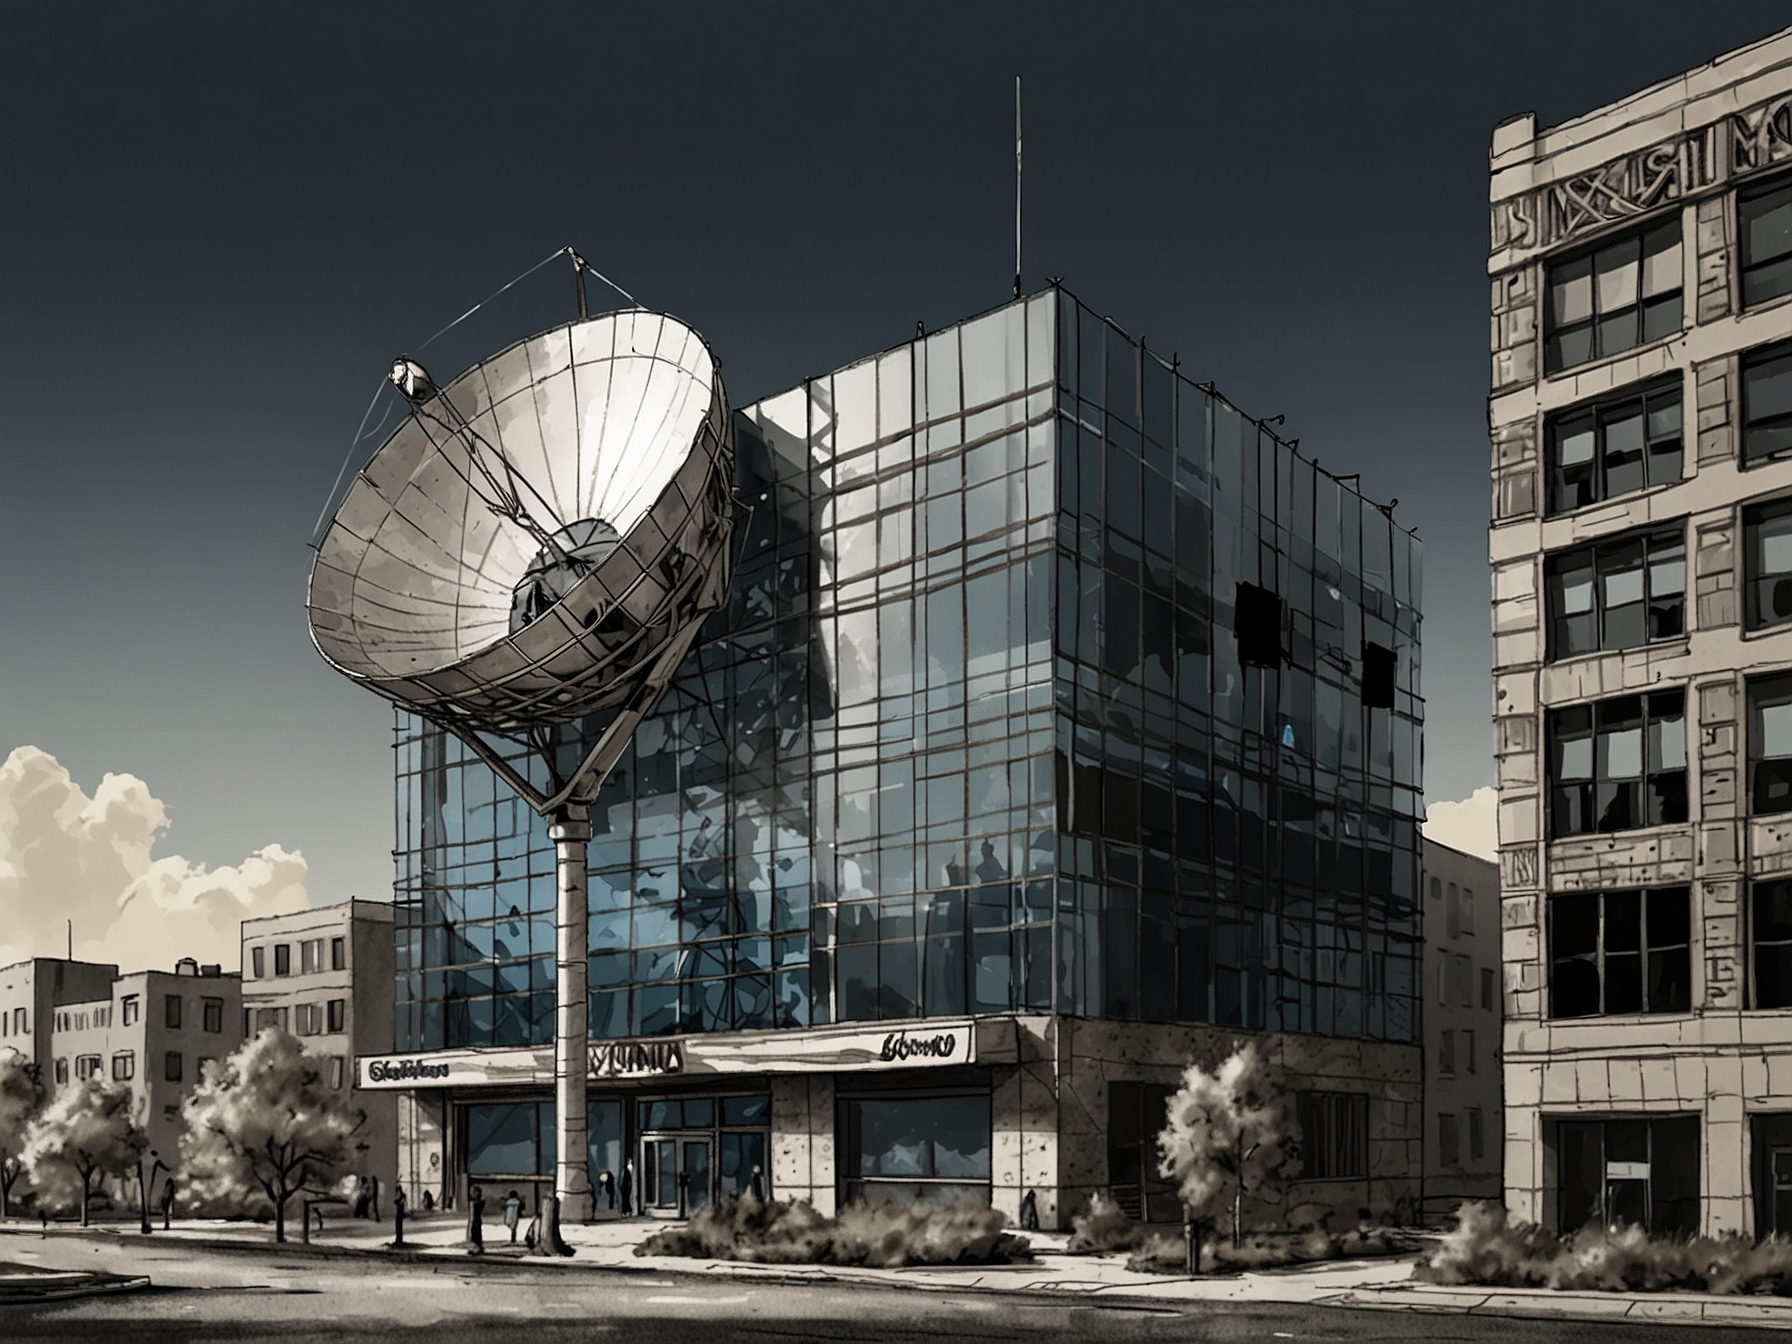 Image of SiriusXM headquarters with a satellite dish, symbolizing the company's core business in satellite radio and its forthcoming financial report.